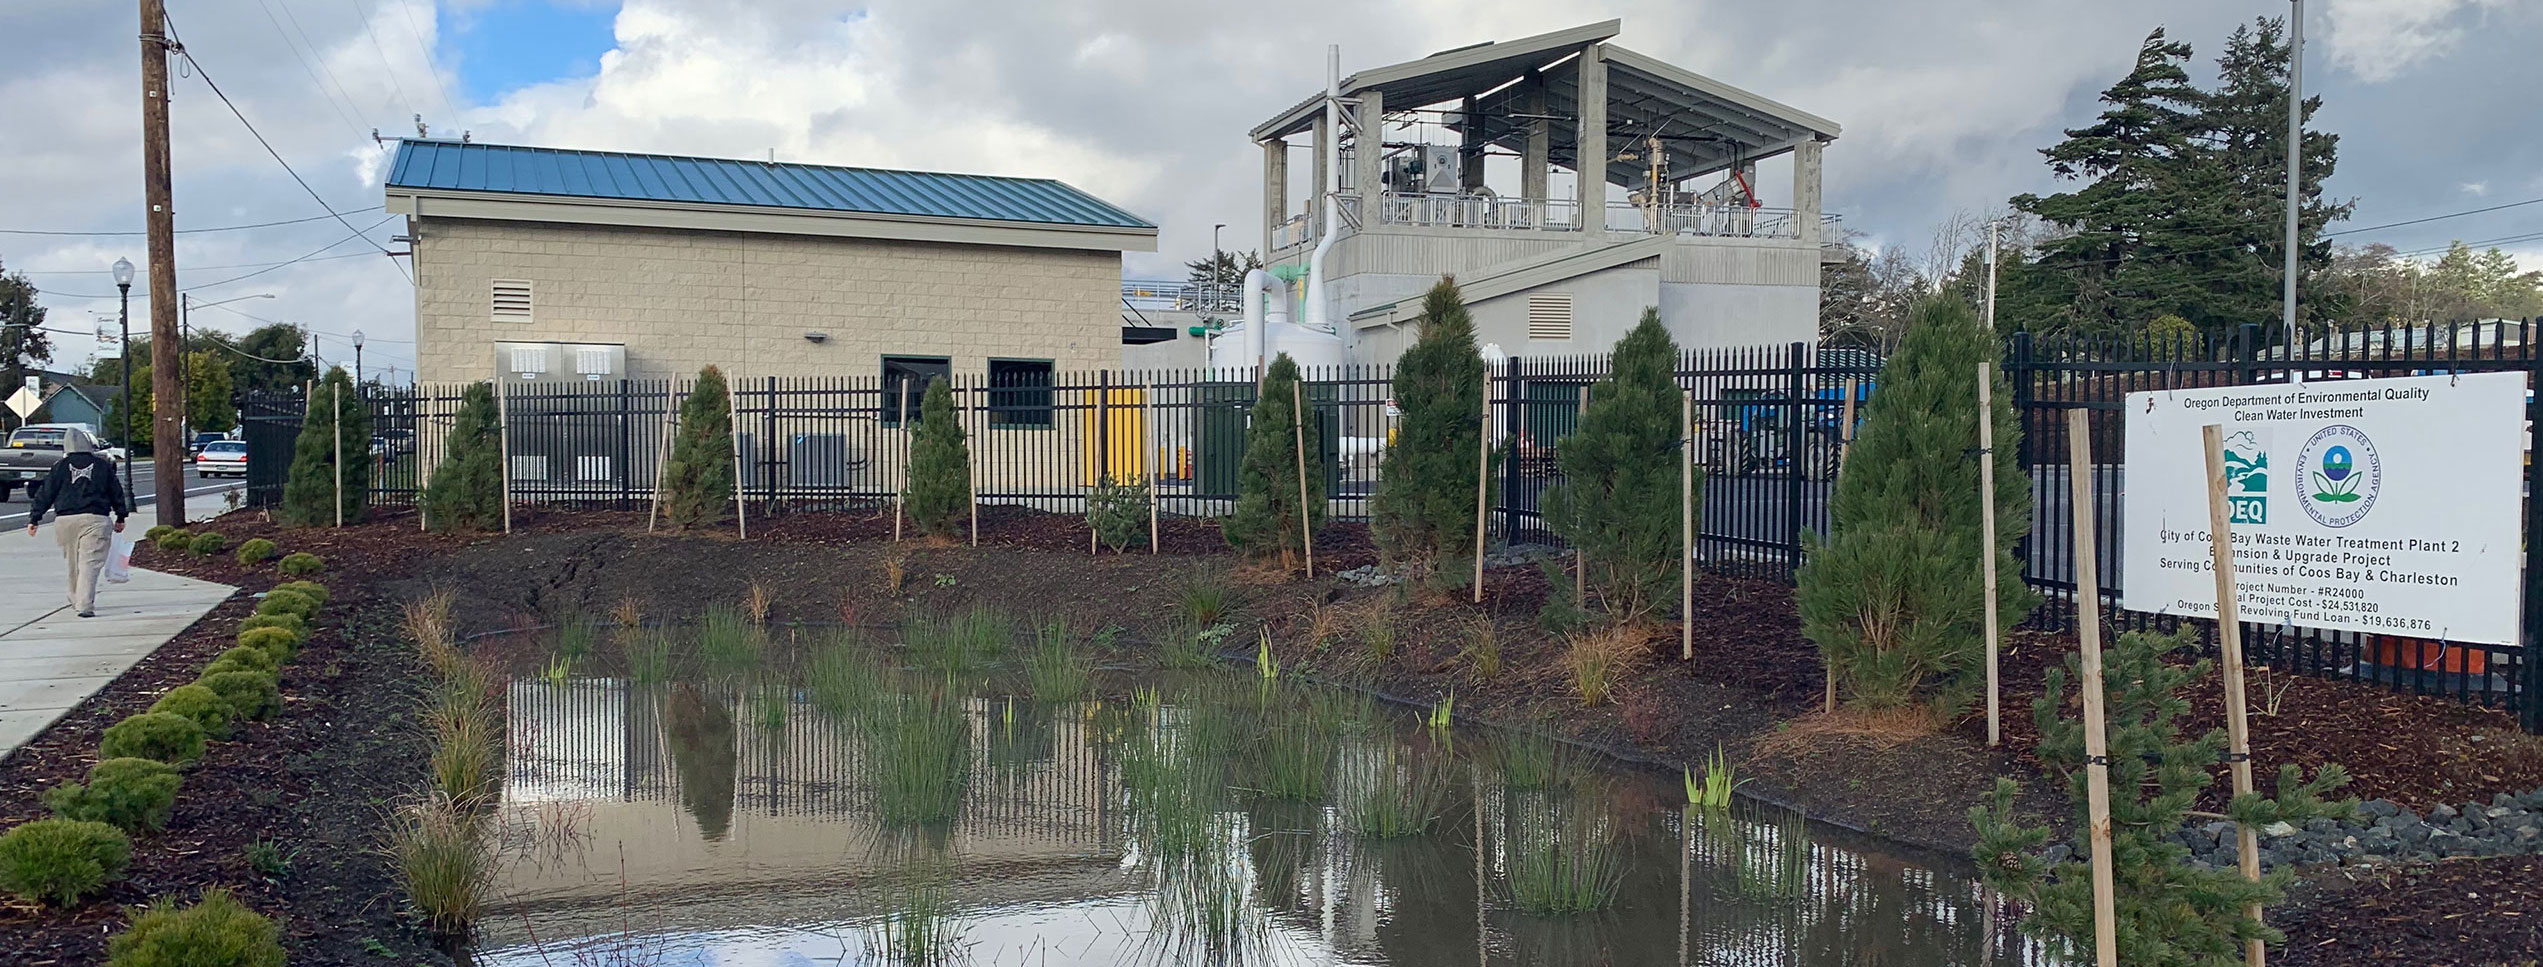 Coos Bay Wastewater Treatment